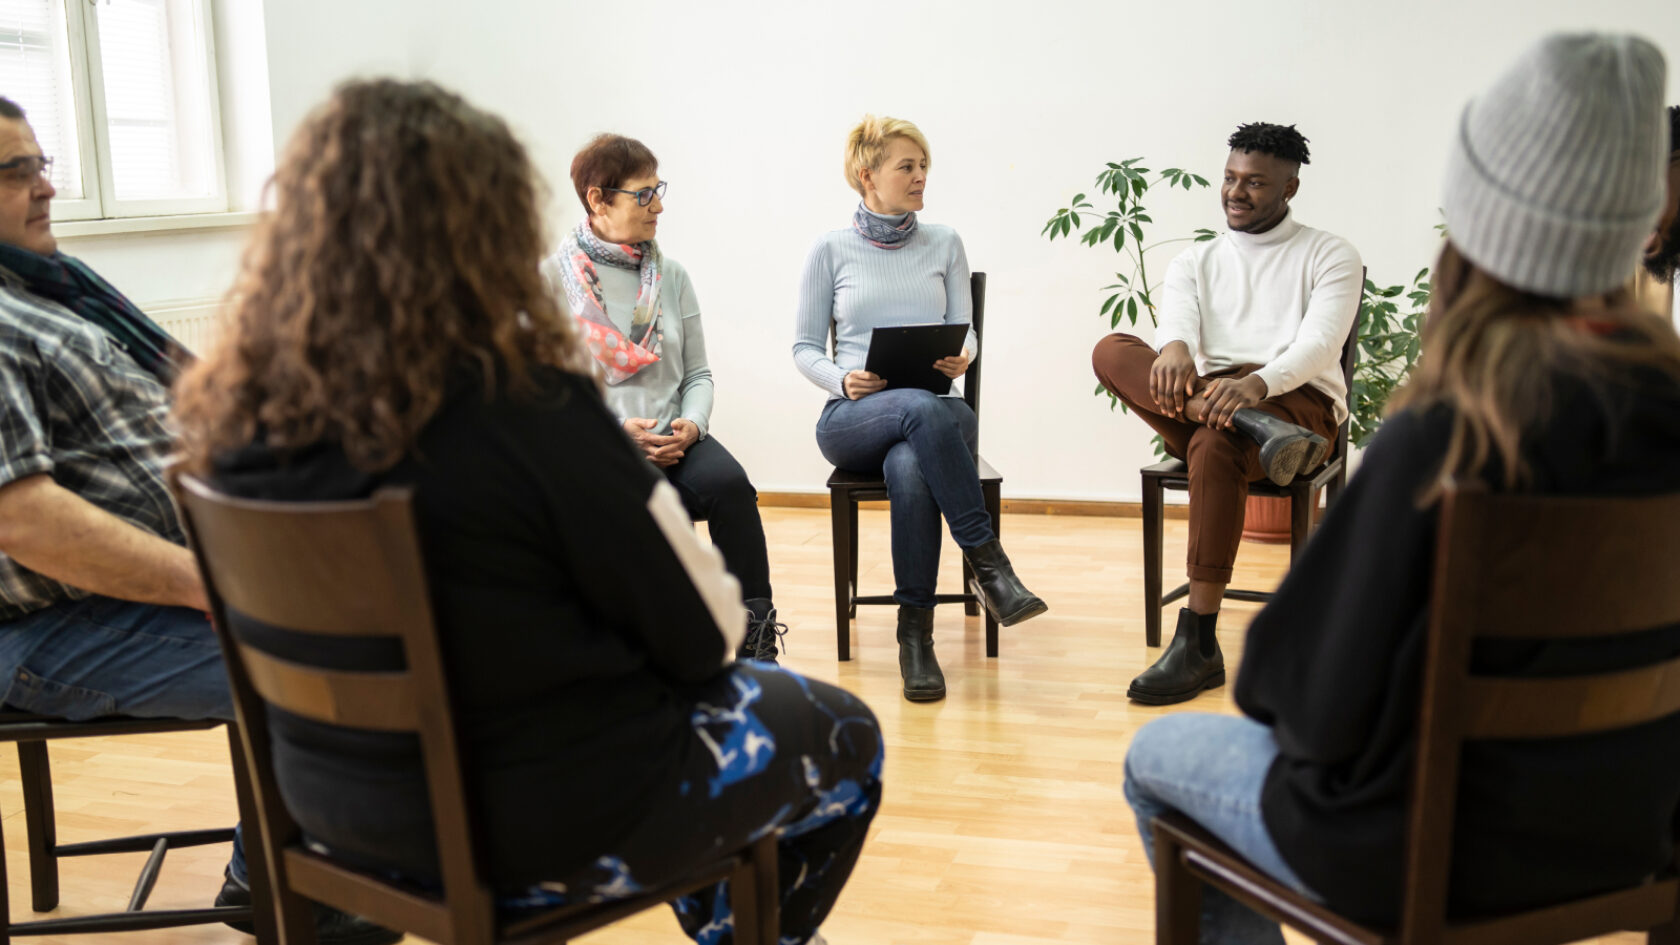 A support group meets in a well-lit room.